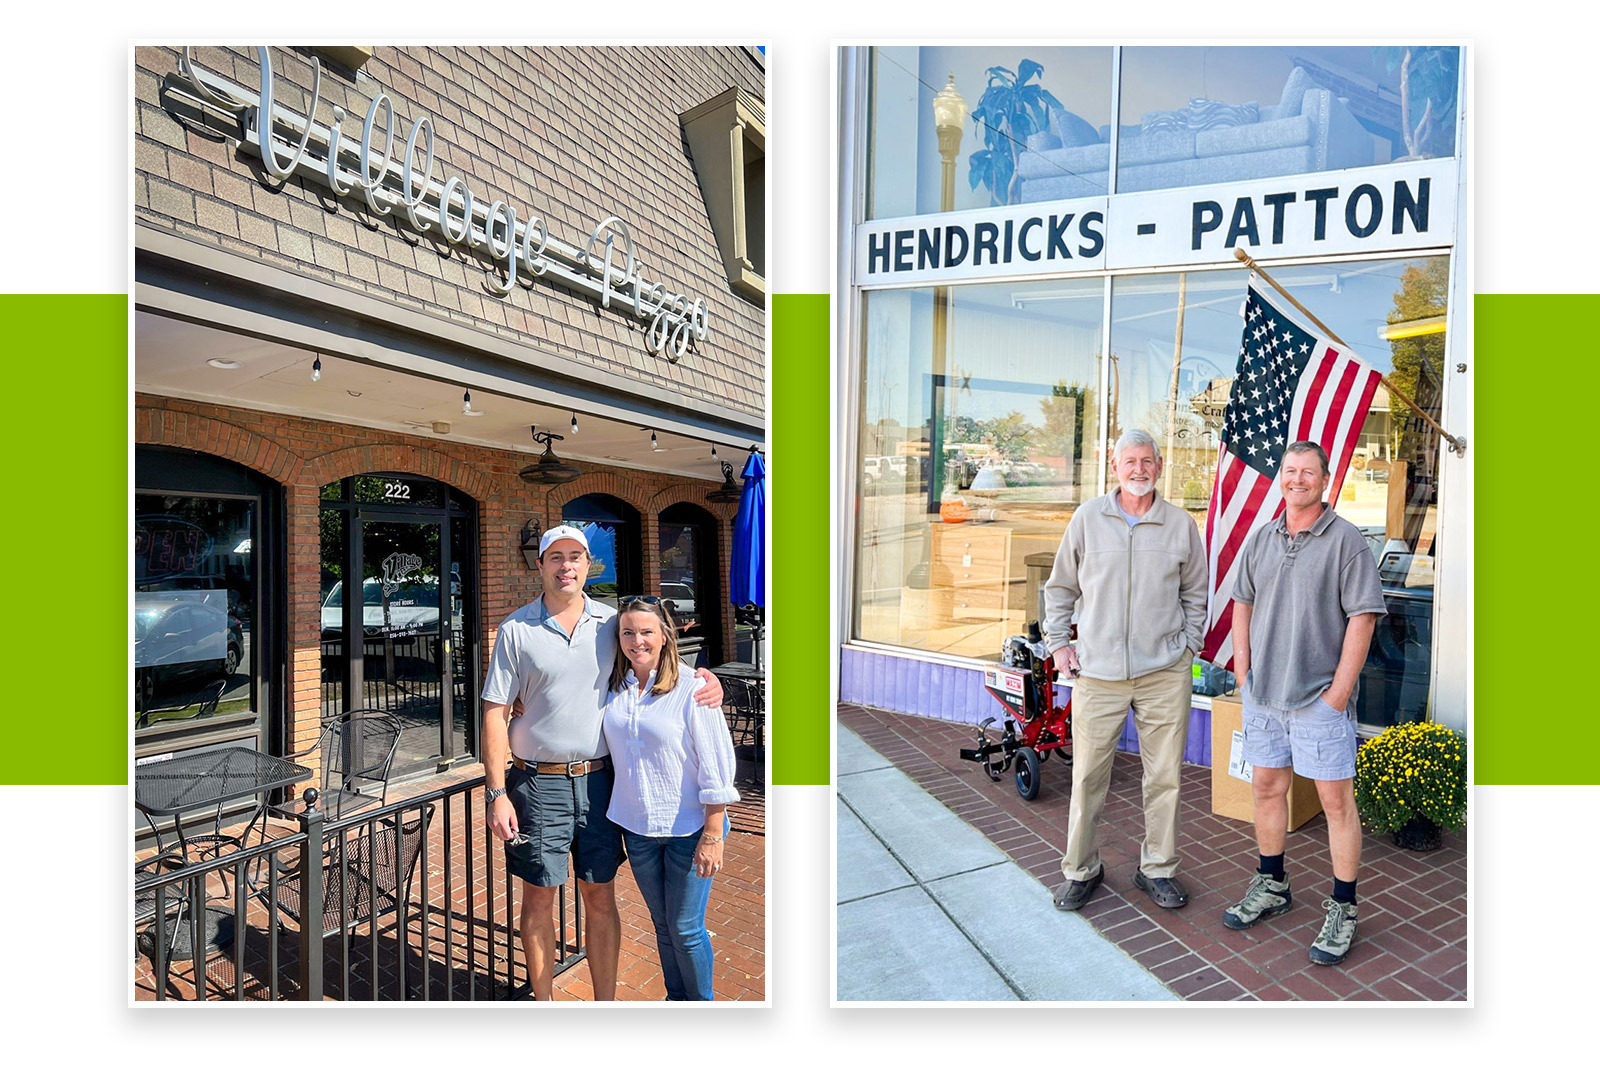 Photos of Laura and Josh Tarokh in front of Village Pizza, and Roy and Bucky Patton in front of Hendricks-Patton Co.